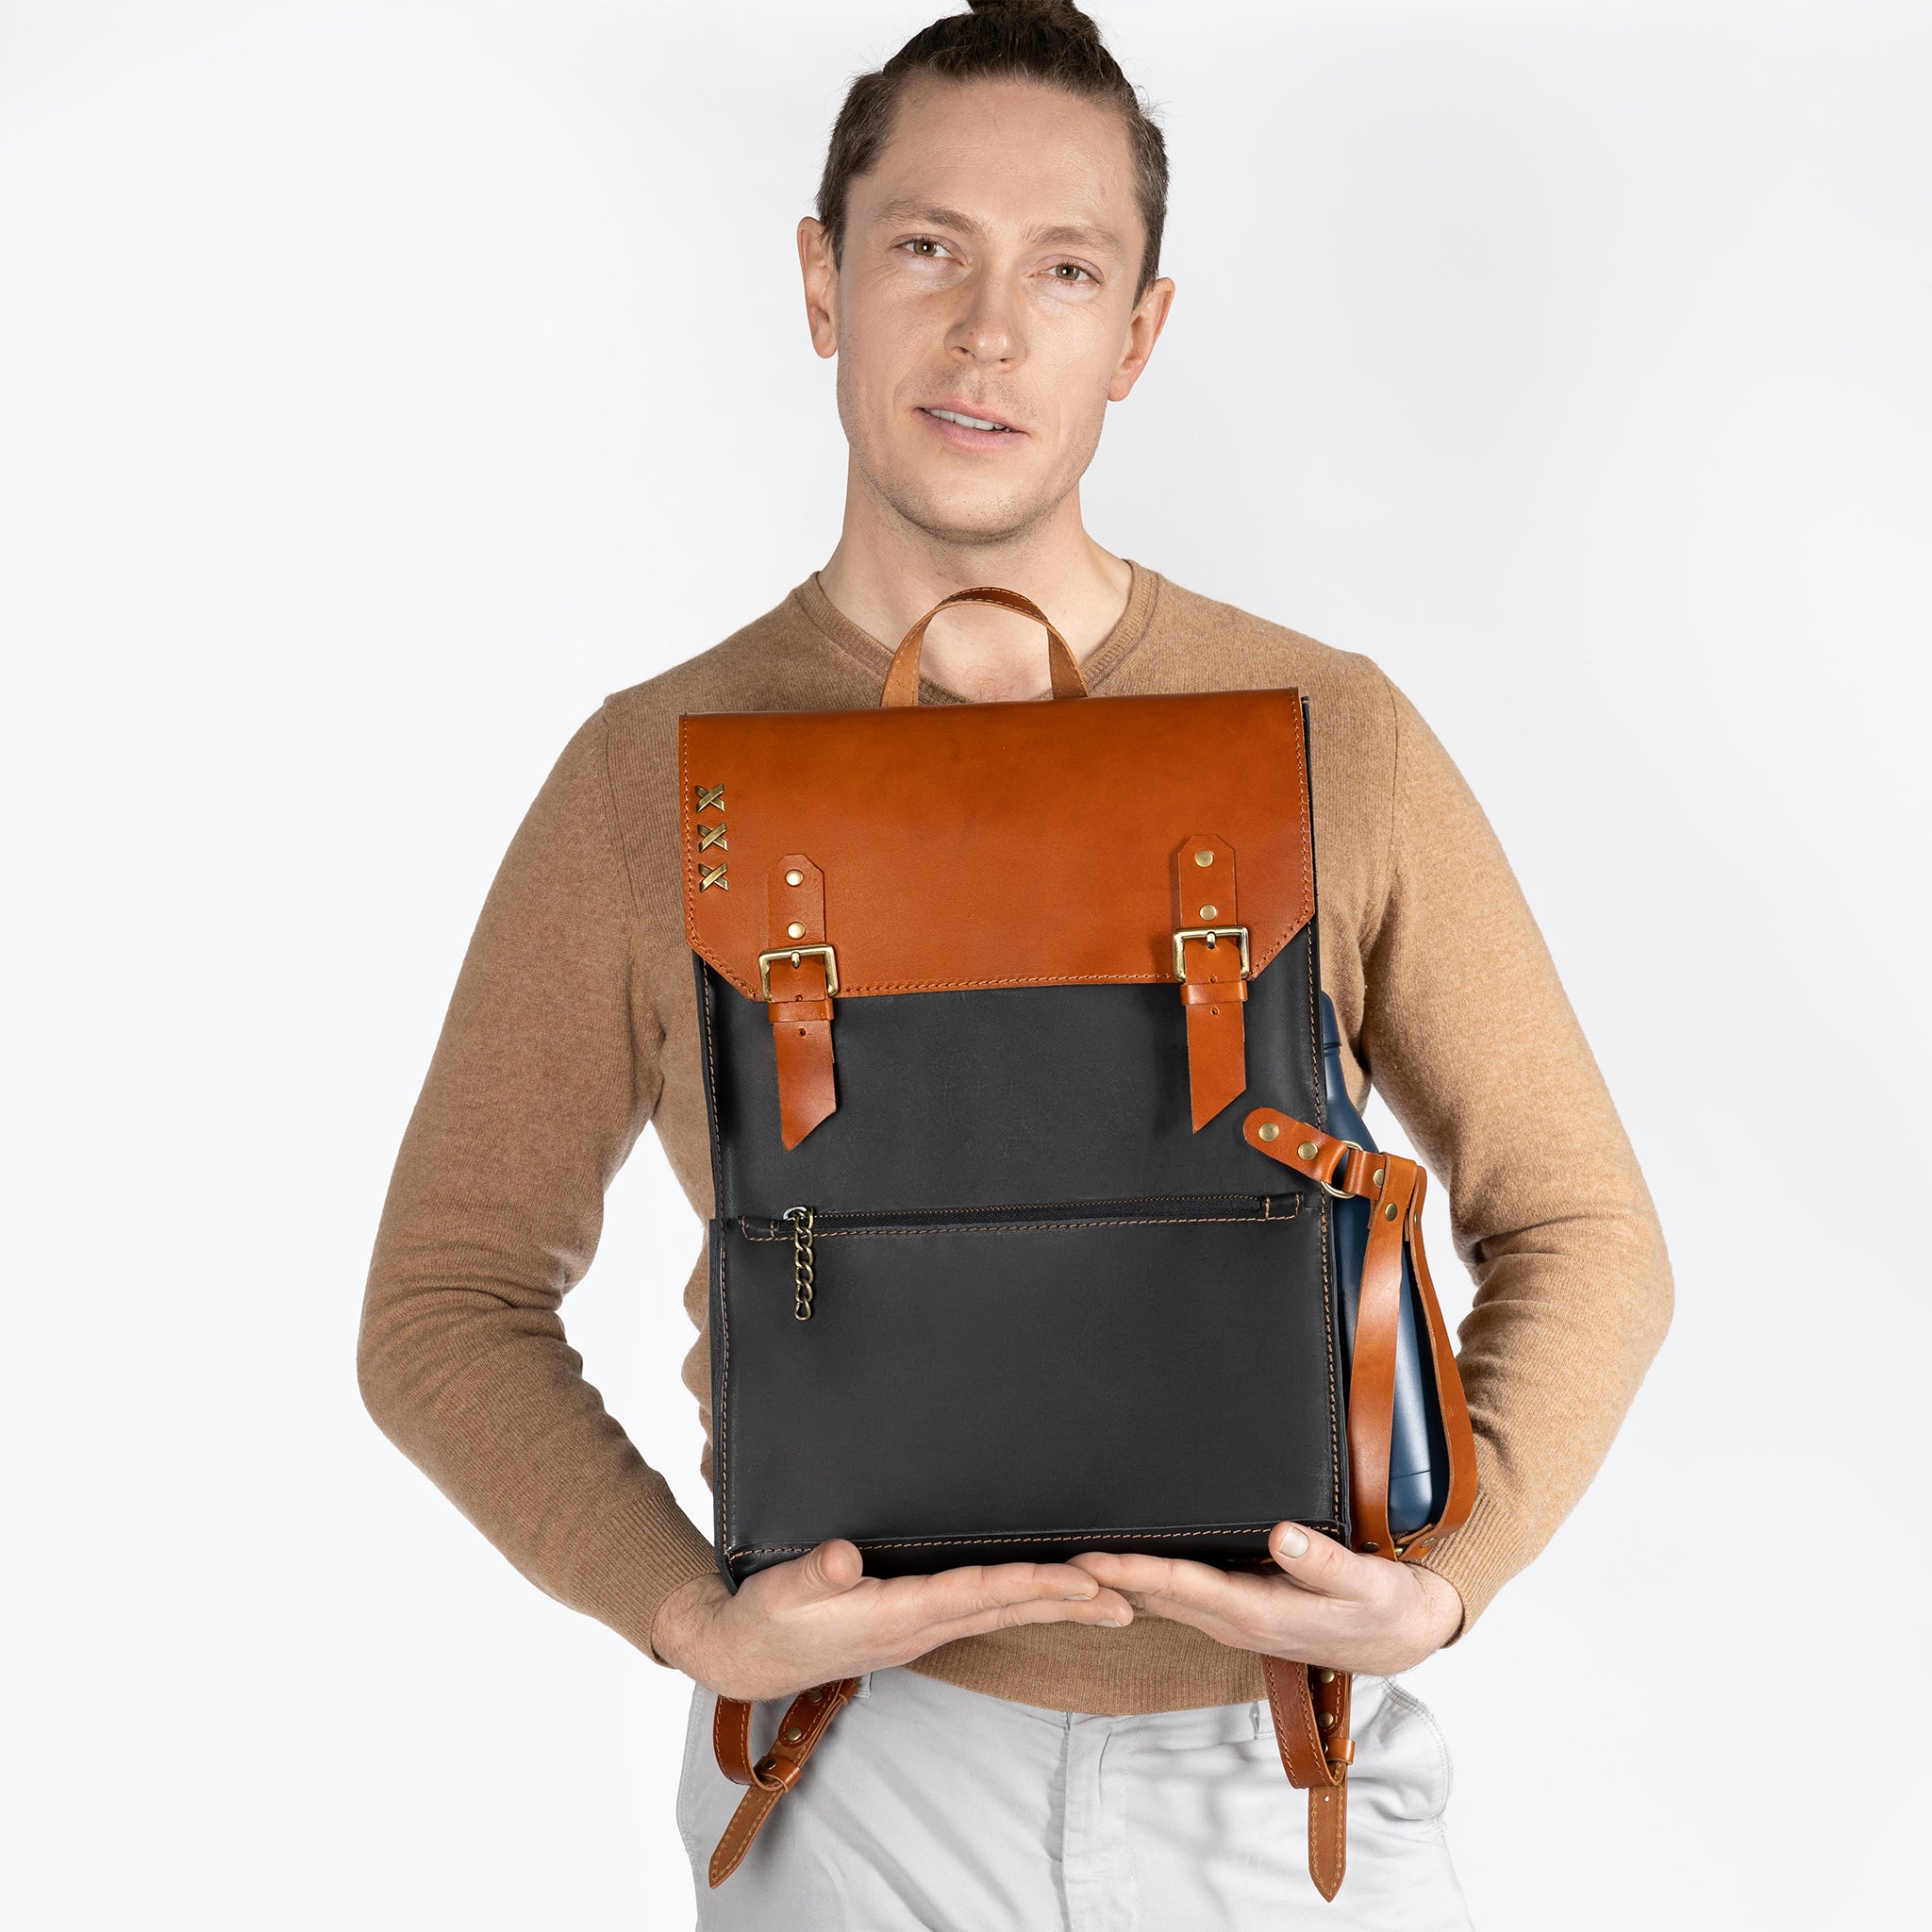 Leather Backpack - Wild Reptile